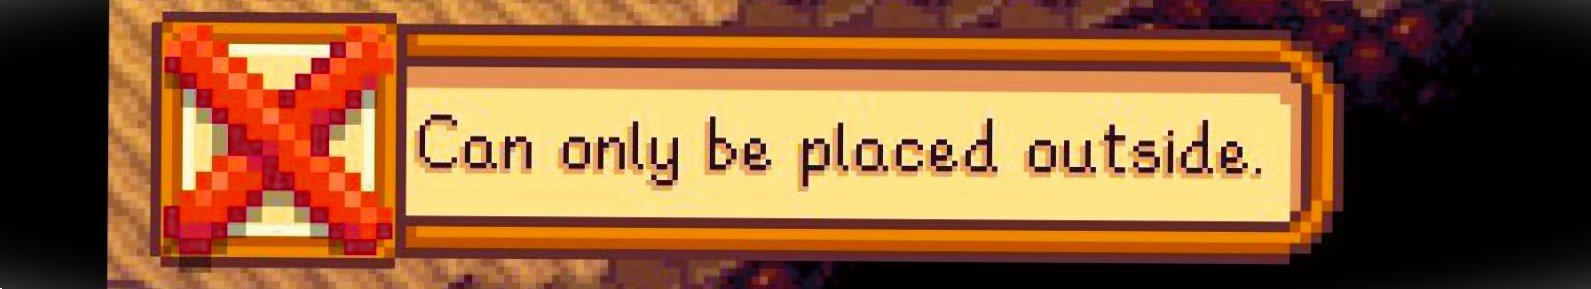 can only be placed outside banner from stardew valley